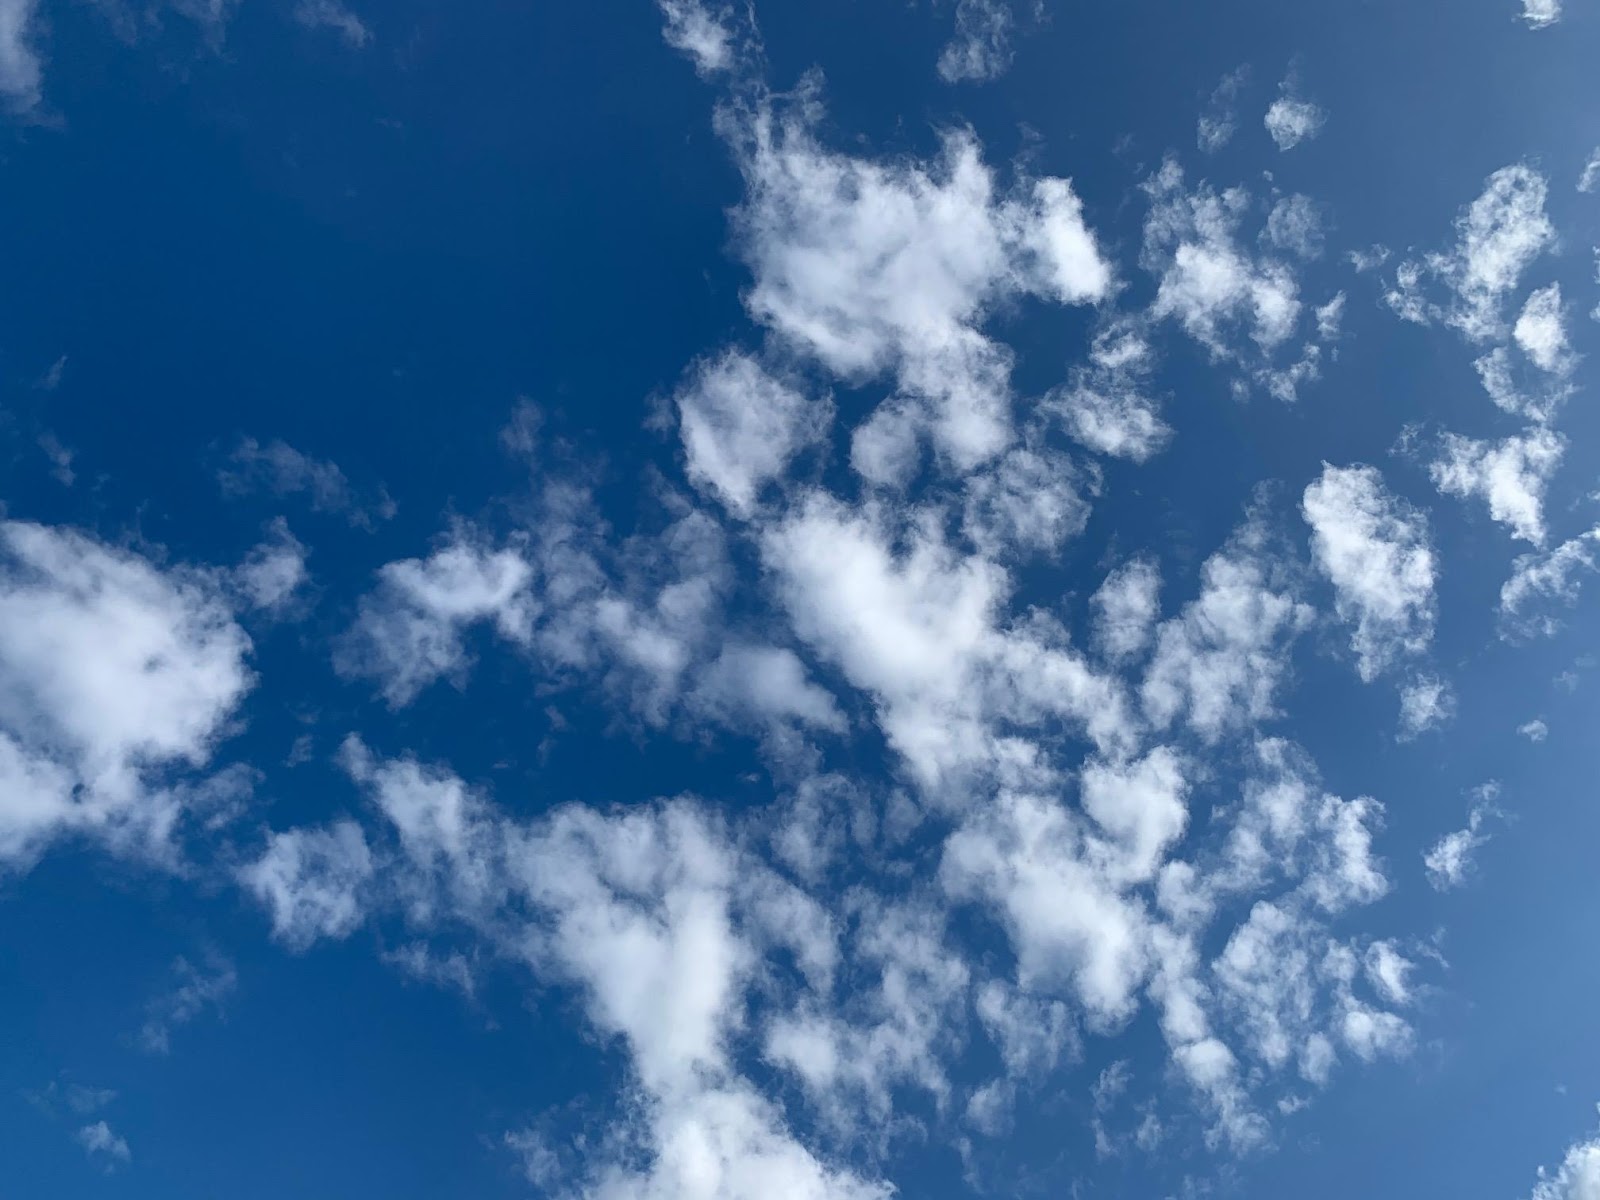 A blue sky with white clouds

Description automatically generated with medium confidence